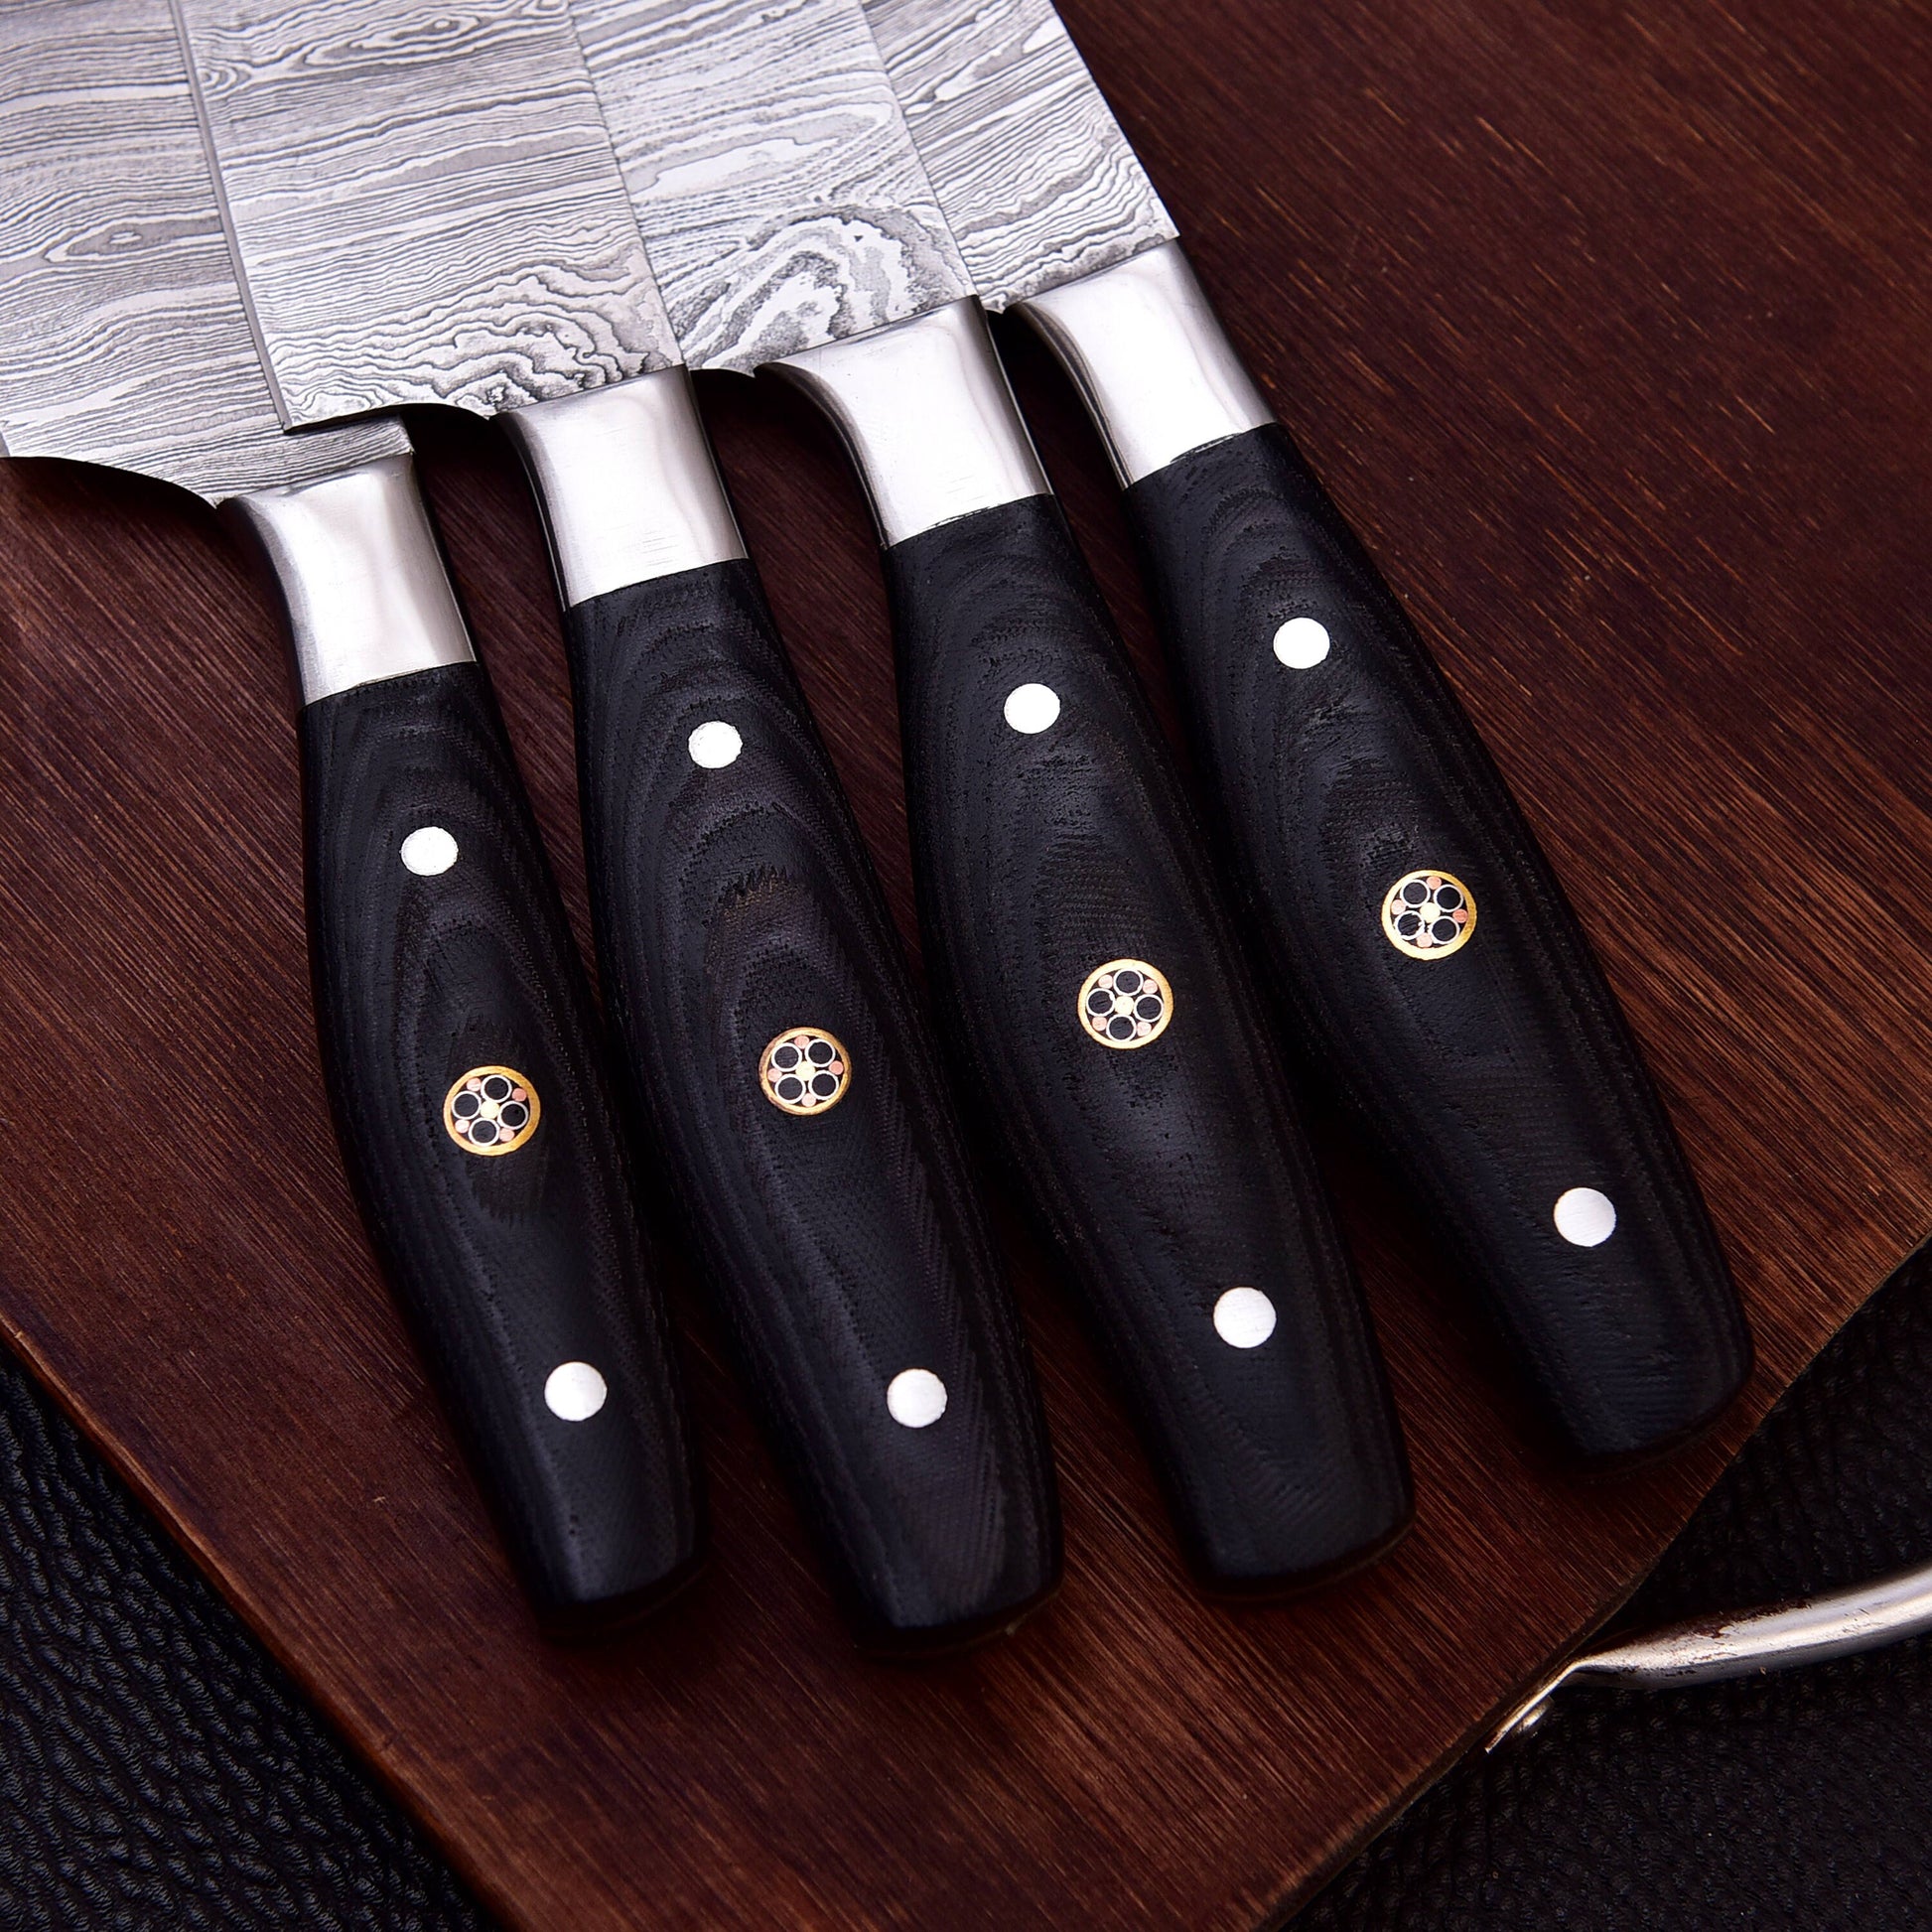 4 pc Black Kitchen Damascus Steel Set Knives - Authentic Handmade Personalized BBQ Cooking Indoor/Outdoor Chef Knife Gift Free Leather Roll